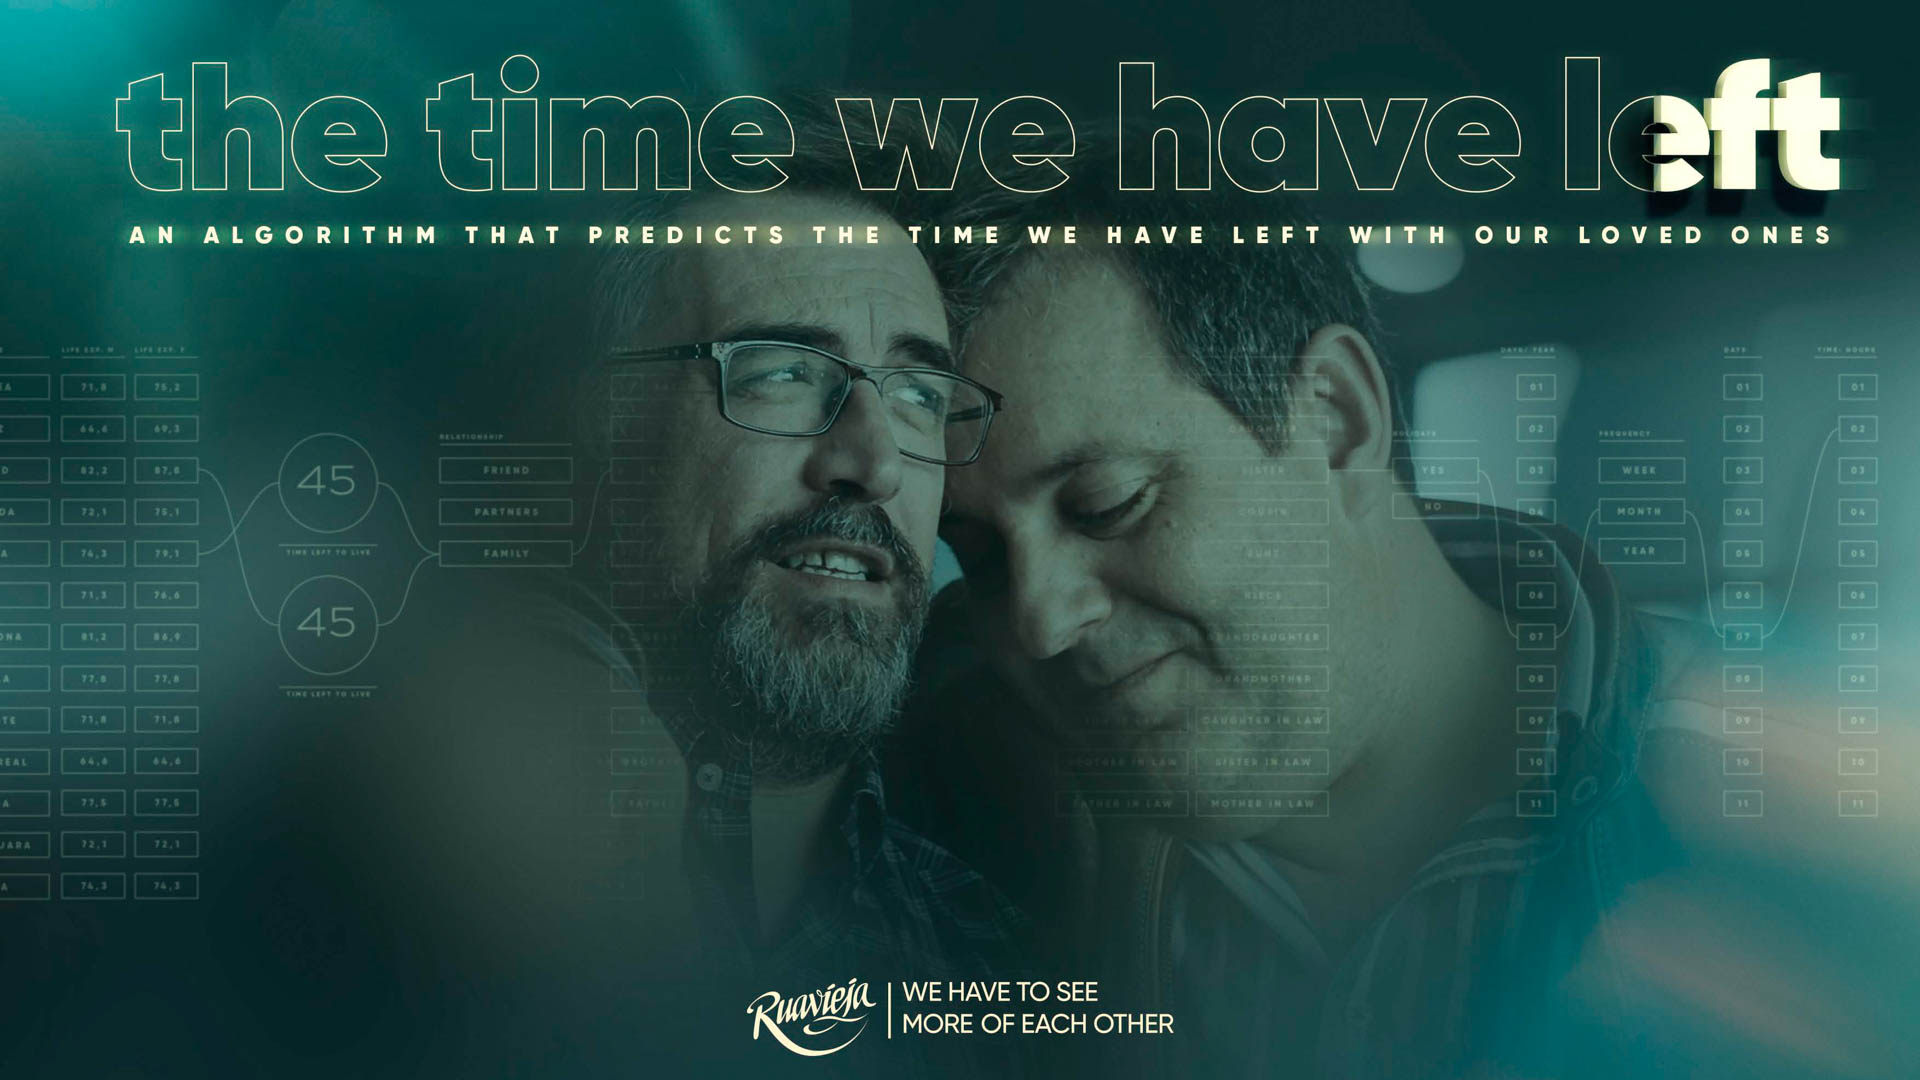 THE TIME WE HAVE LEFT